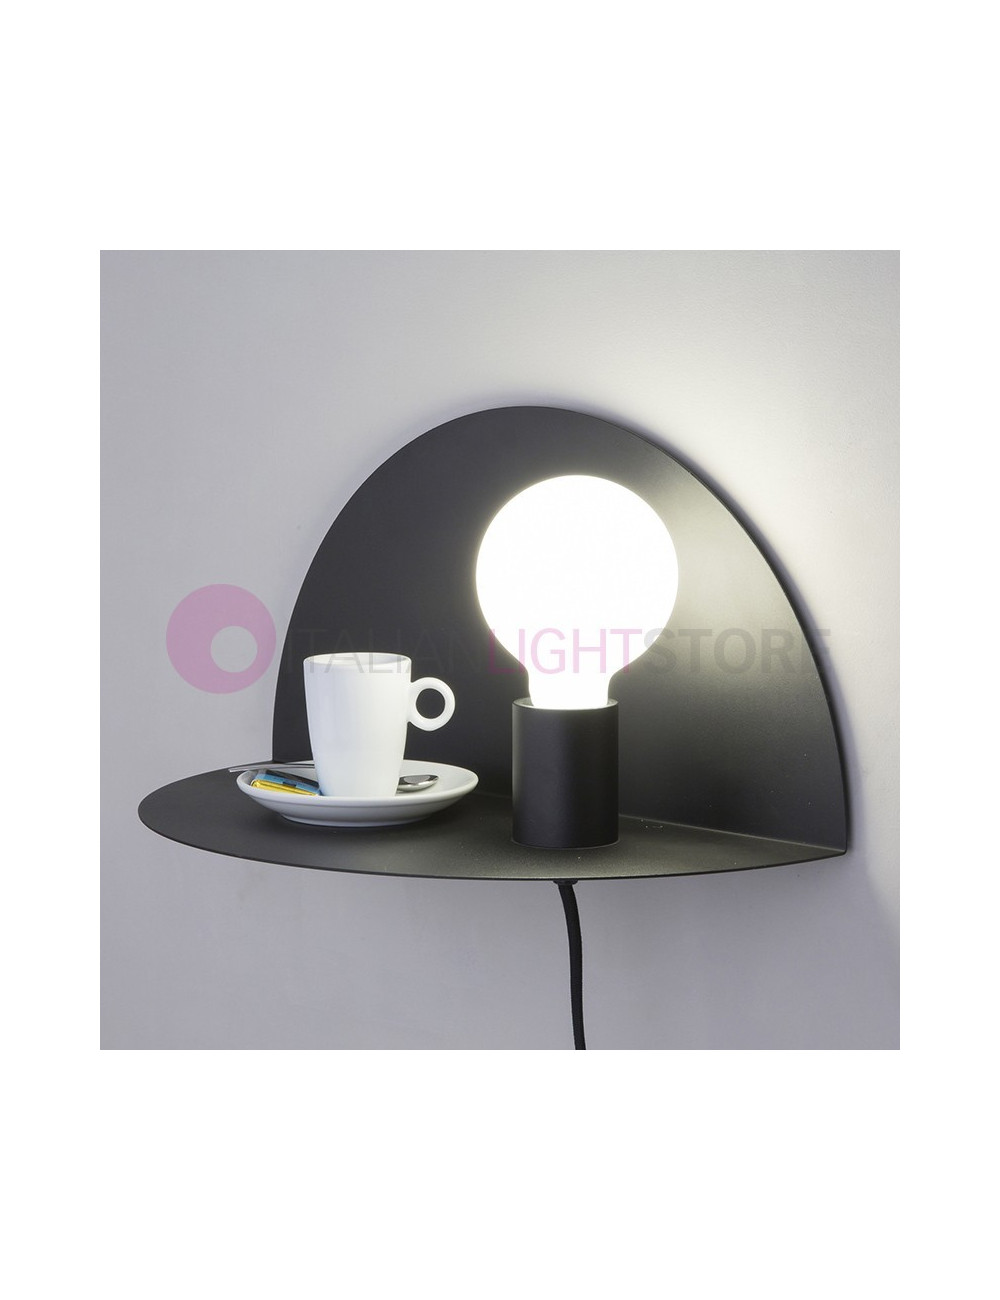 NIT Wall Lamp with light Bulb to View, Modern Design | the Lighthouse